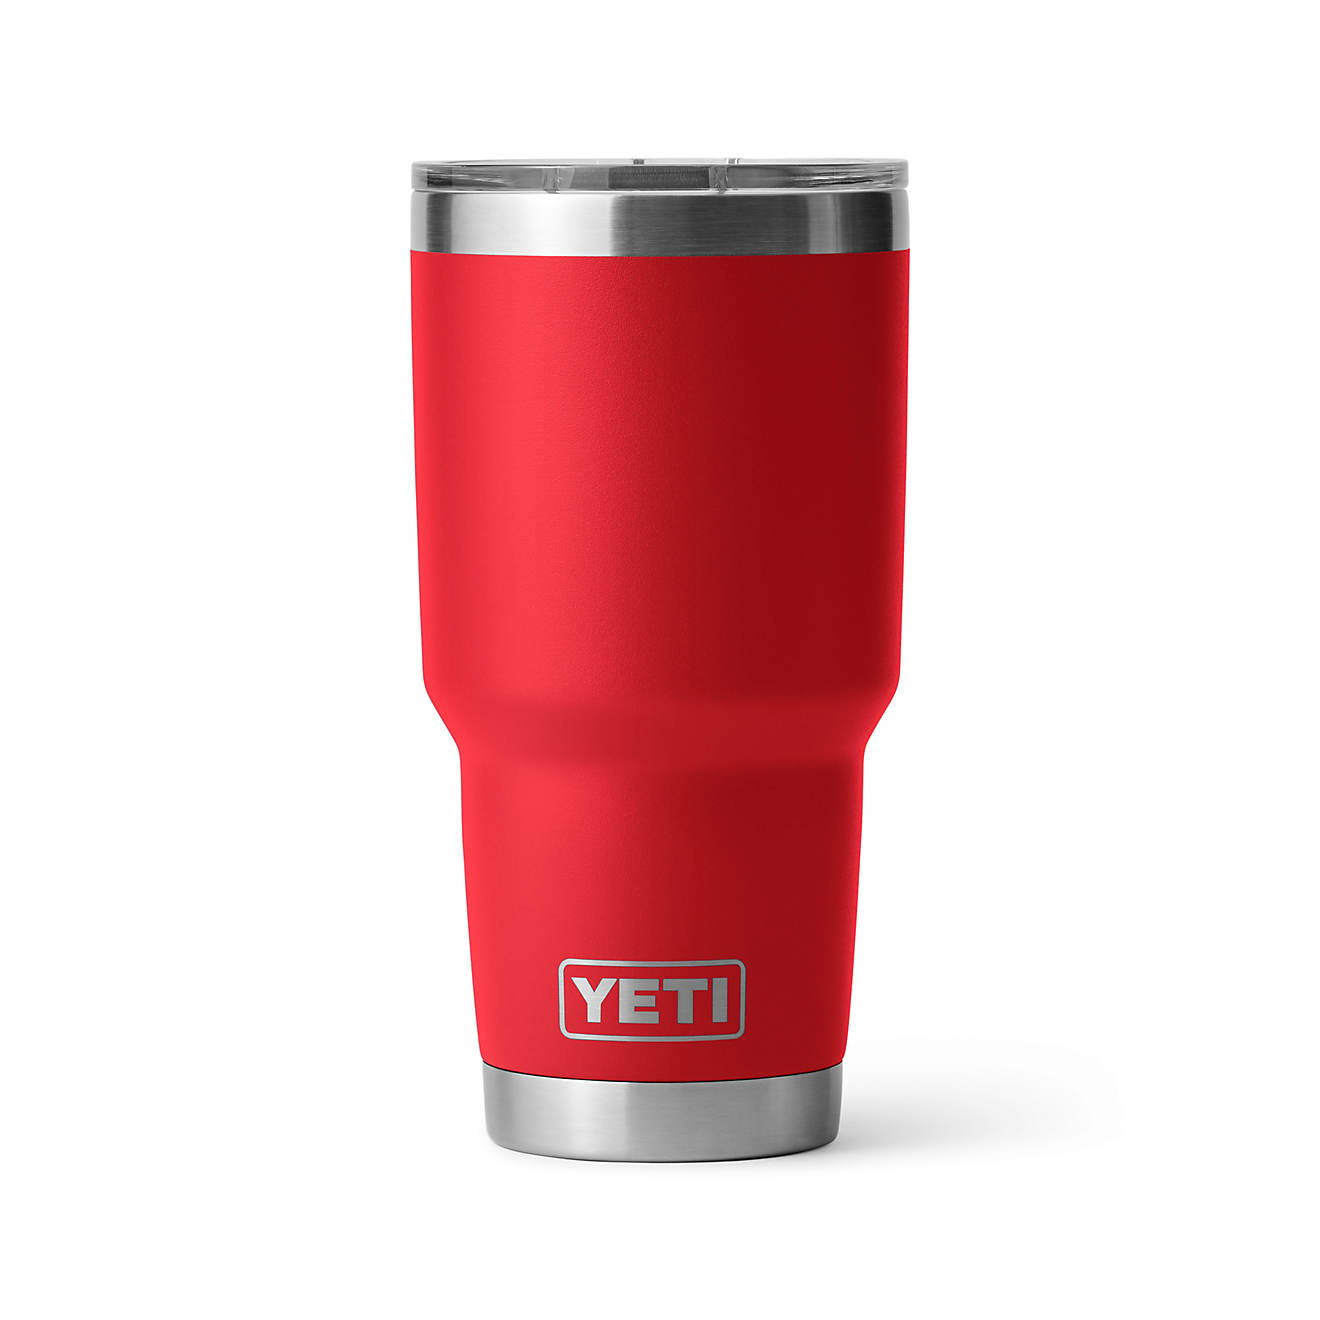 https://academy.scene7.com/is/image/academy//drinkware/yeti-duracoat-rambler-30-oz-tumbler-21071501391-red/a7e409b171a04505813d58b3a059e6a1?$pdp-gallery-ng$